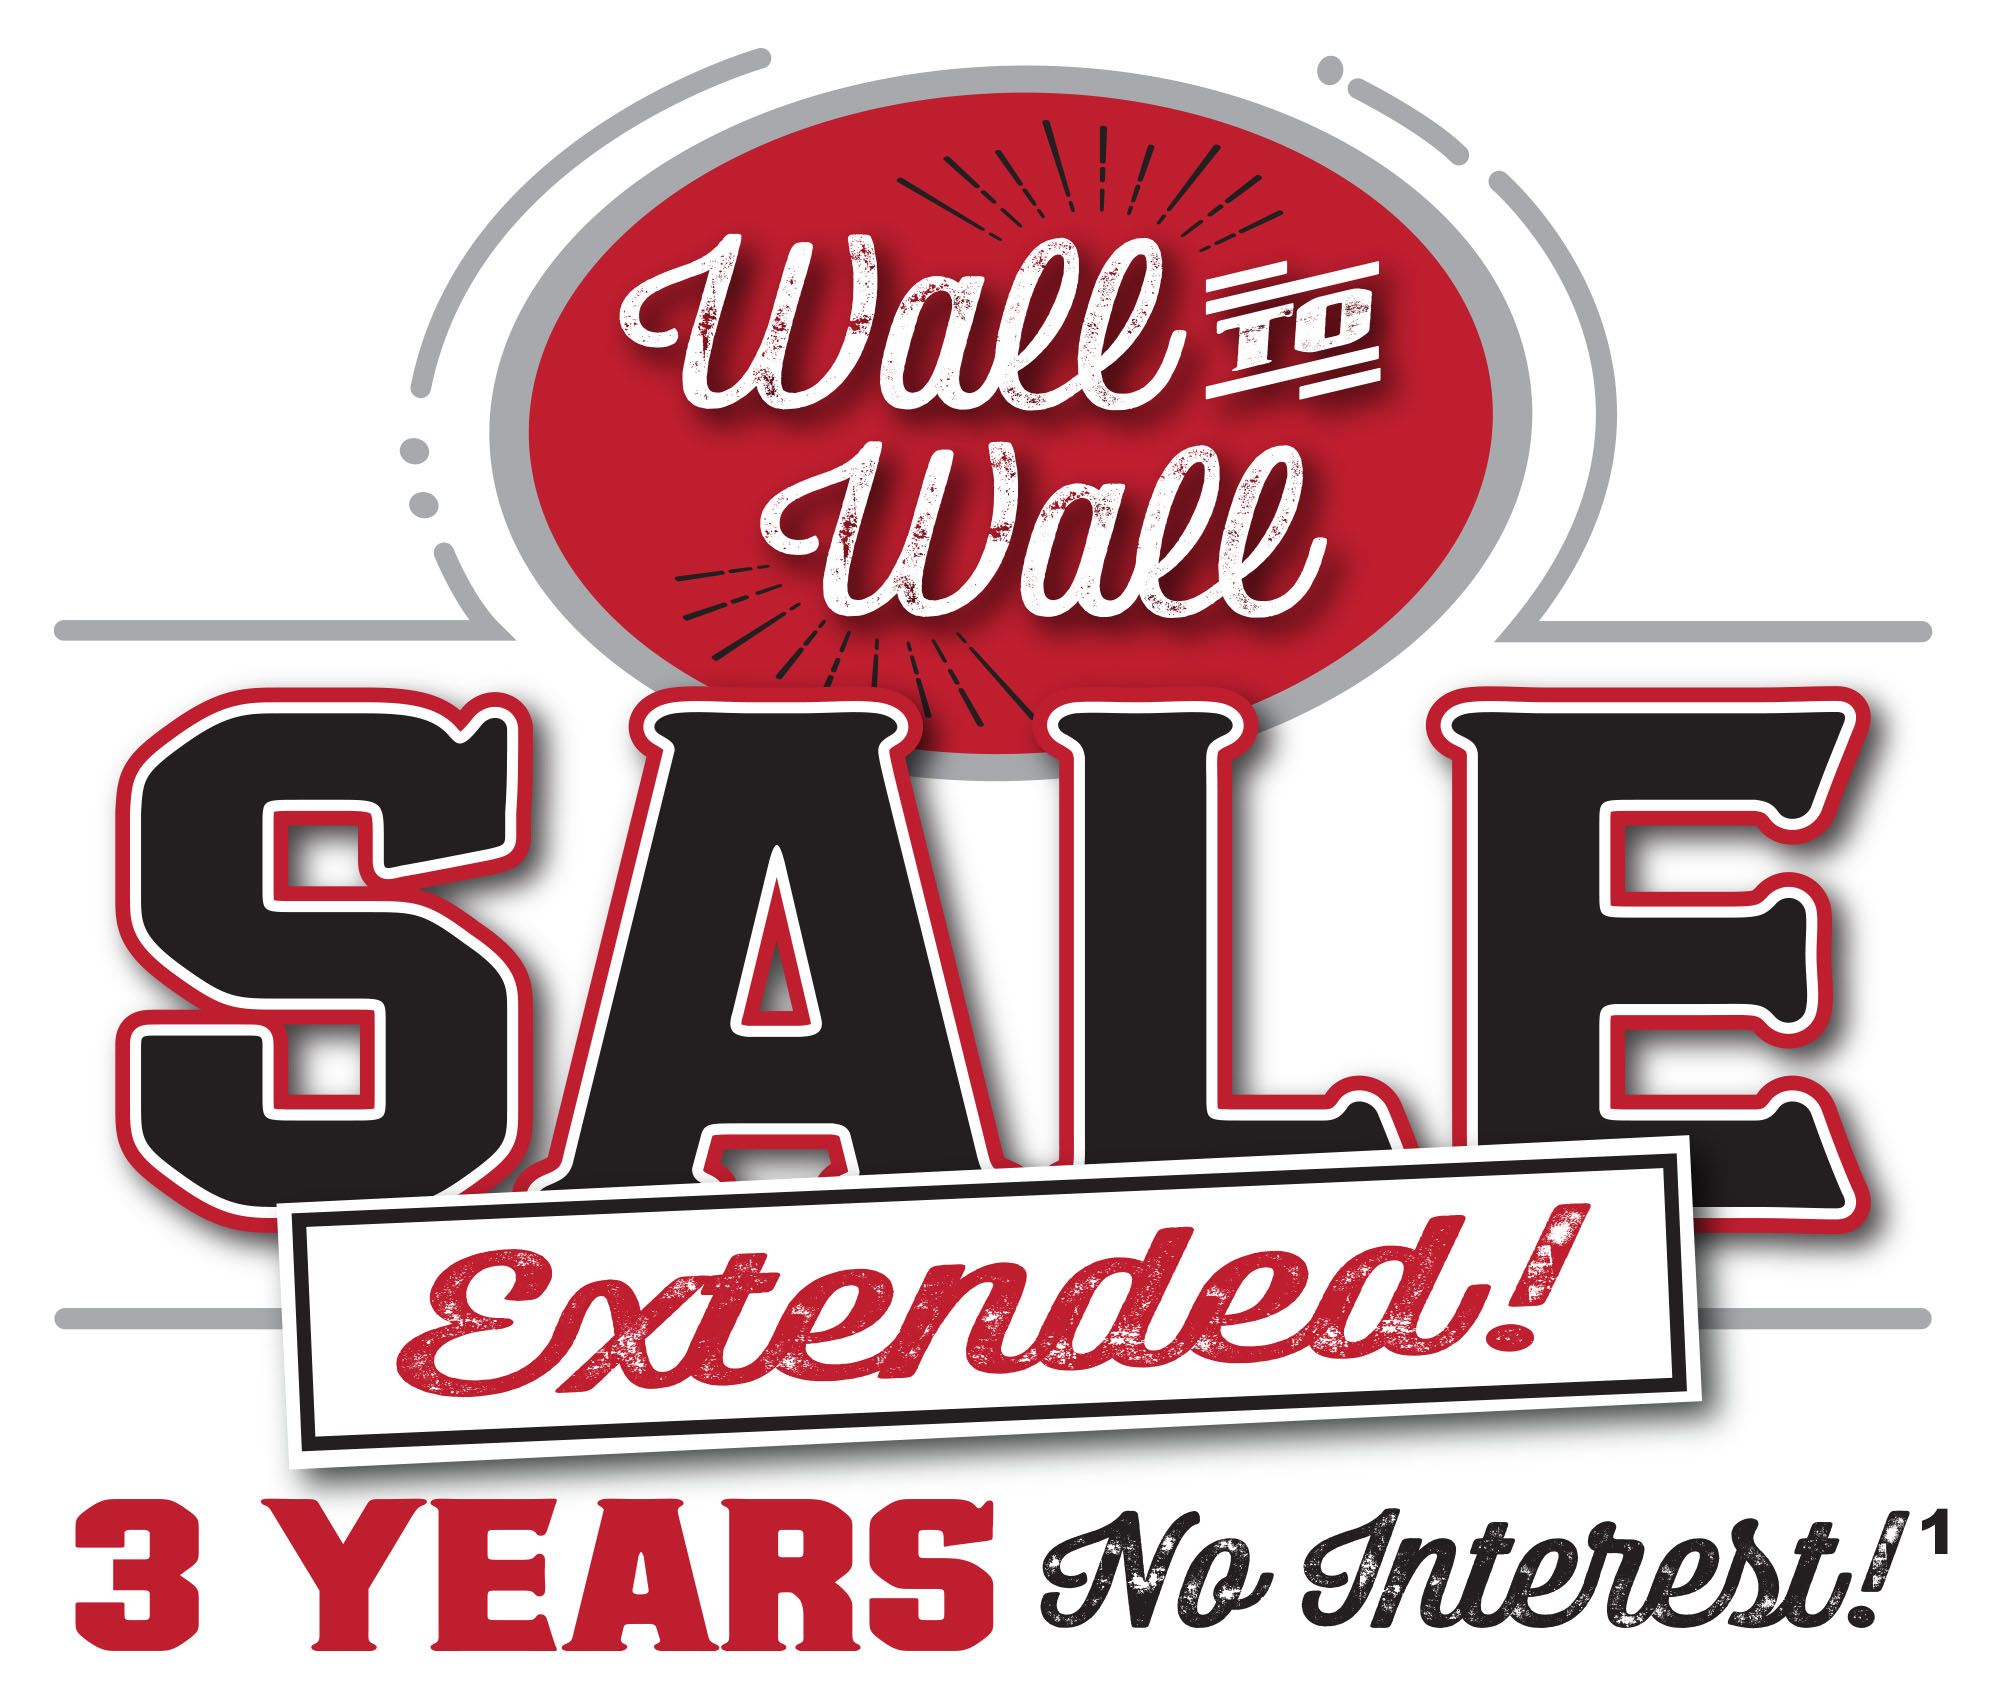 Wall To Wall Sale Extended